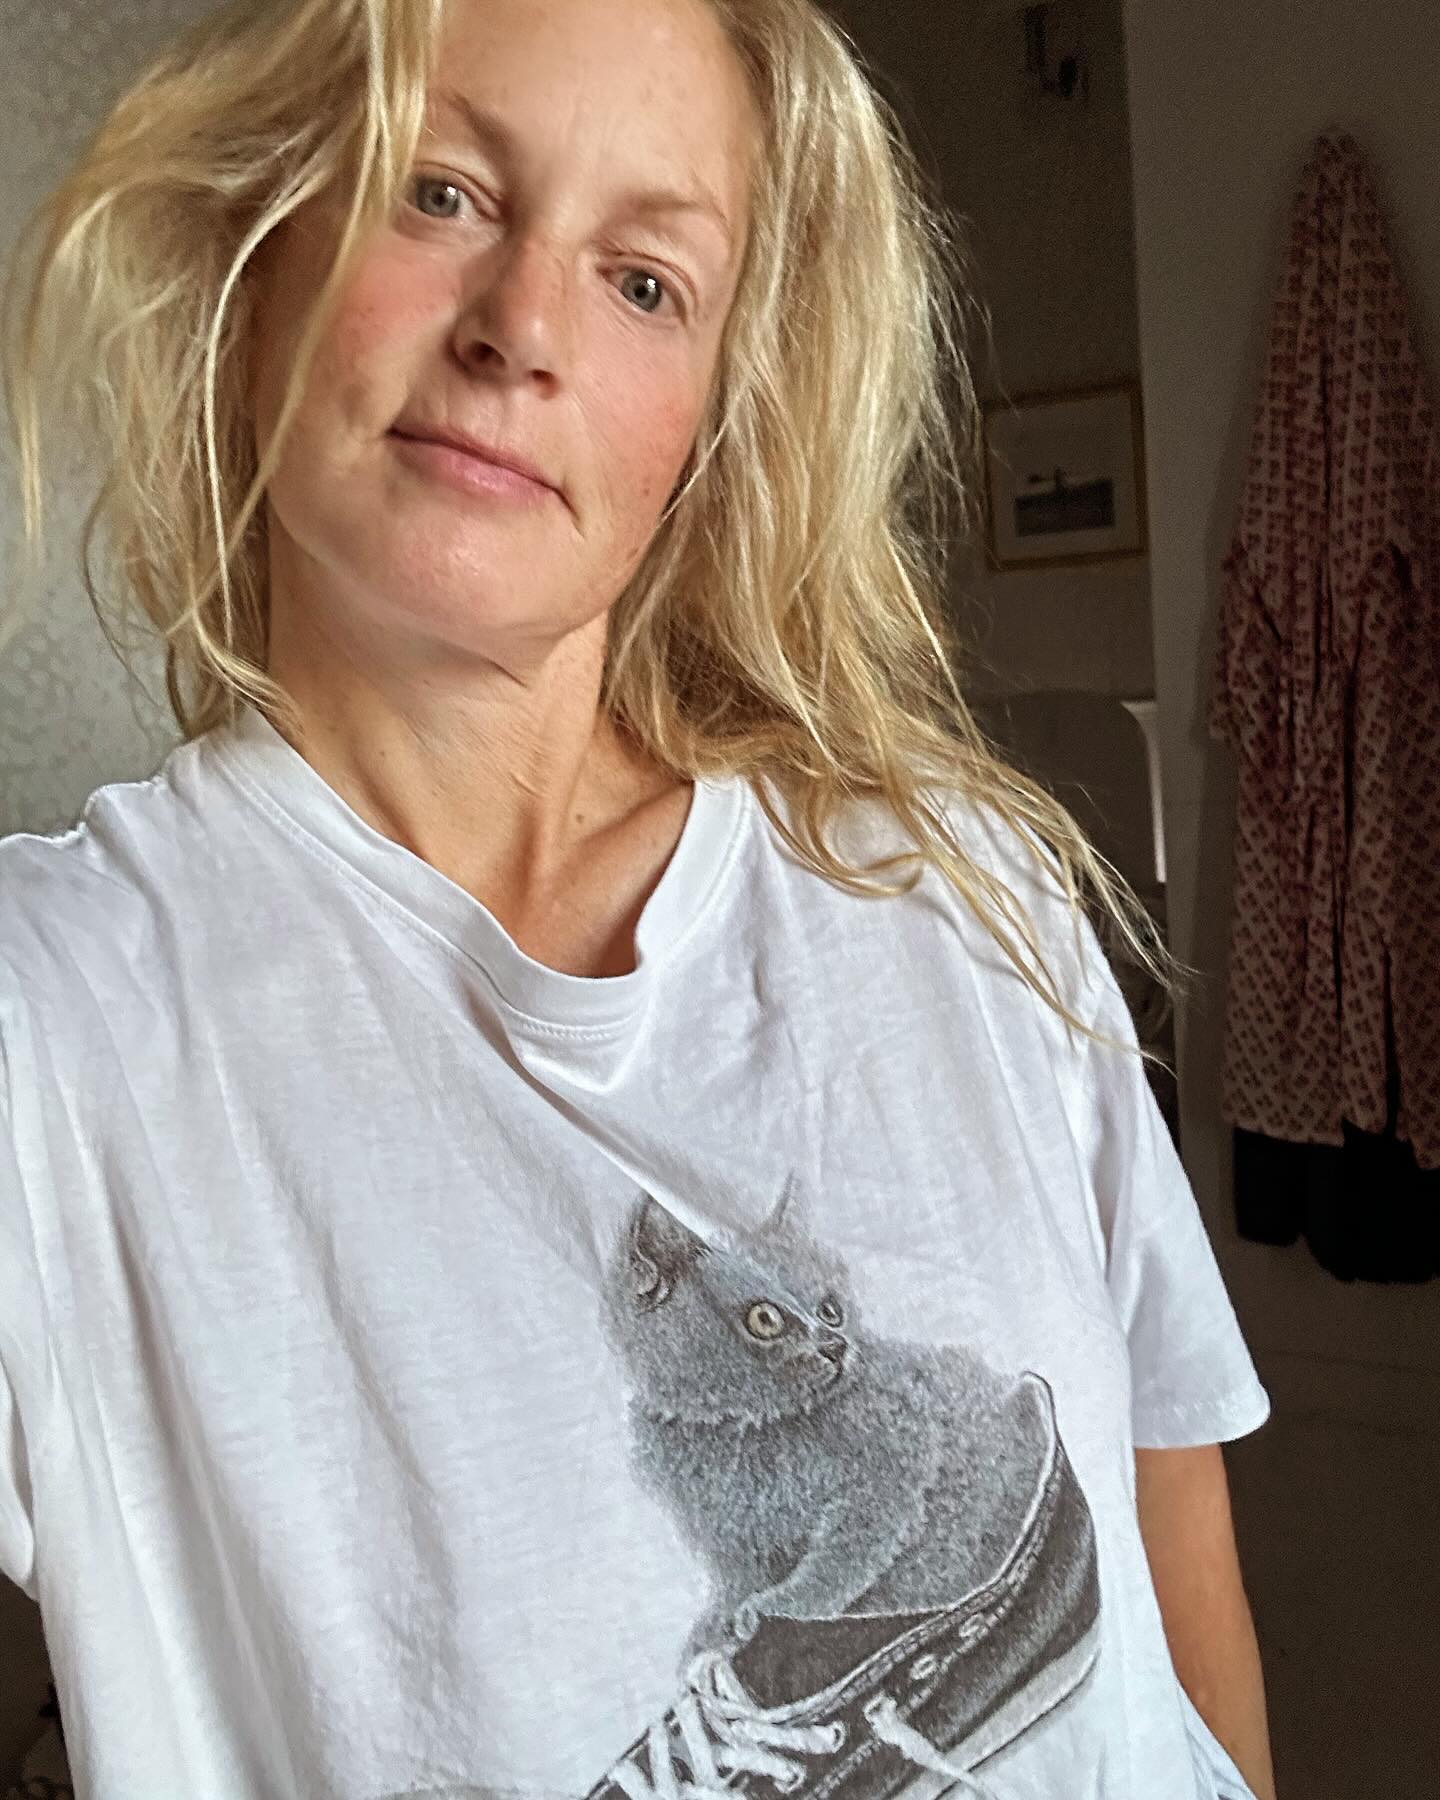 Ali posted a new photo where she went makeup-free in a T-shirt